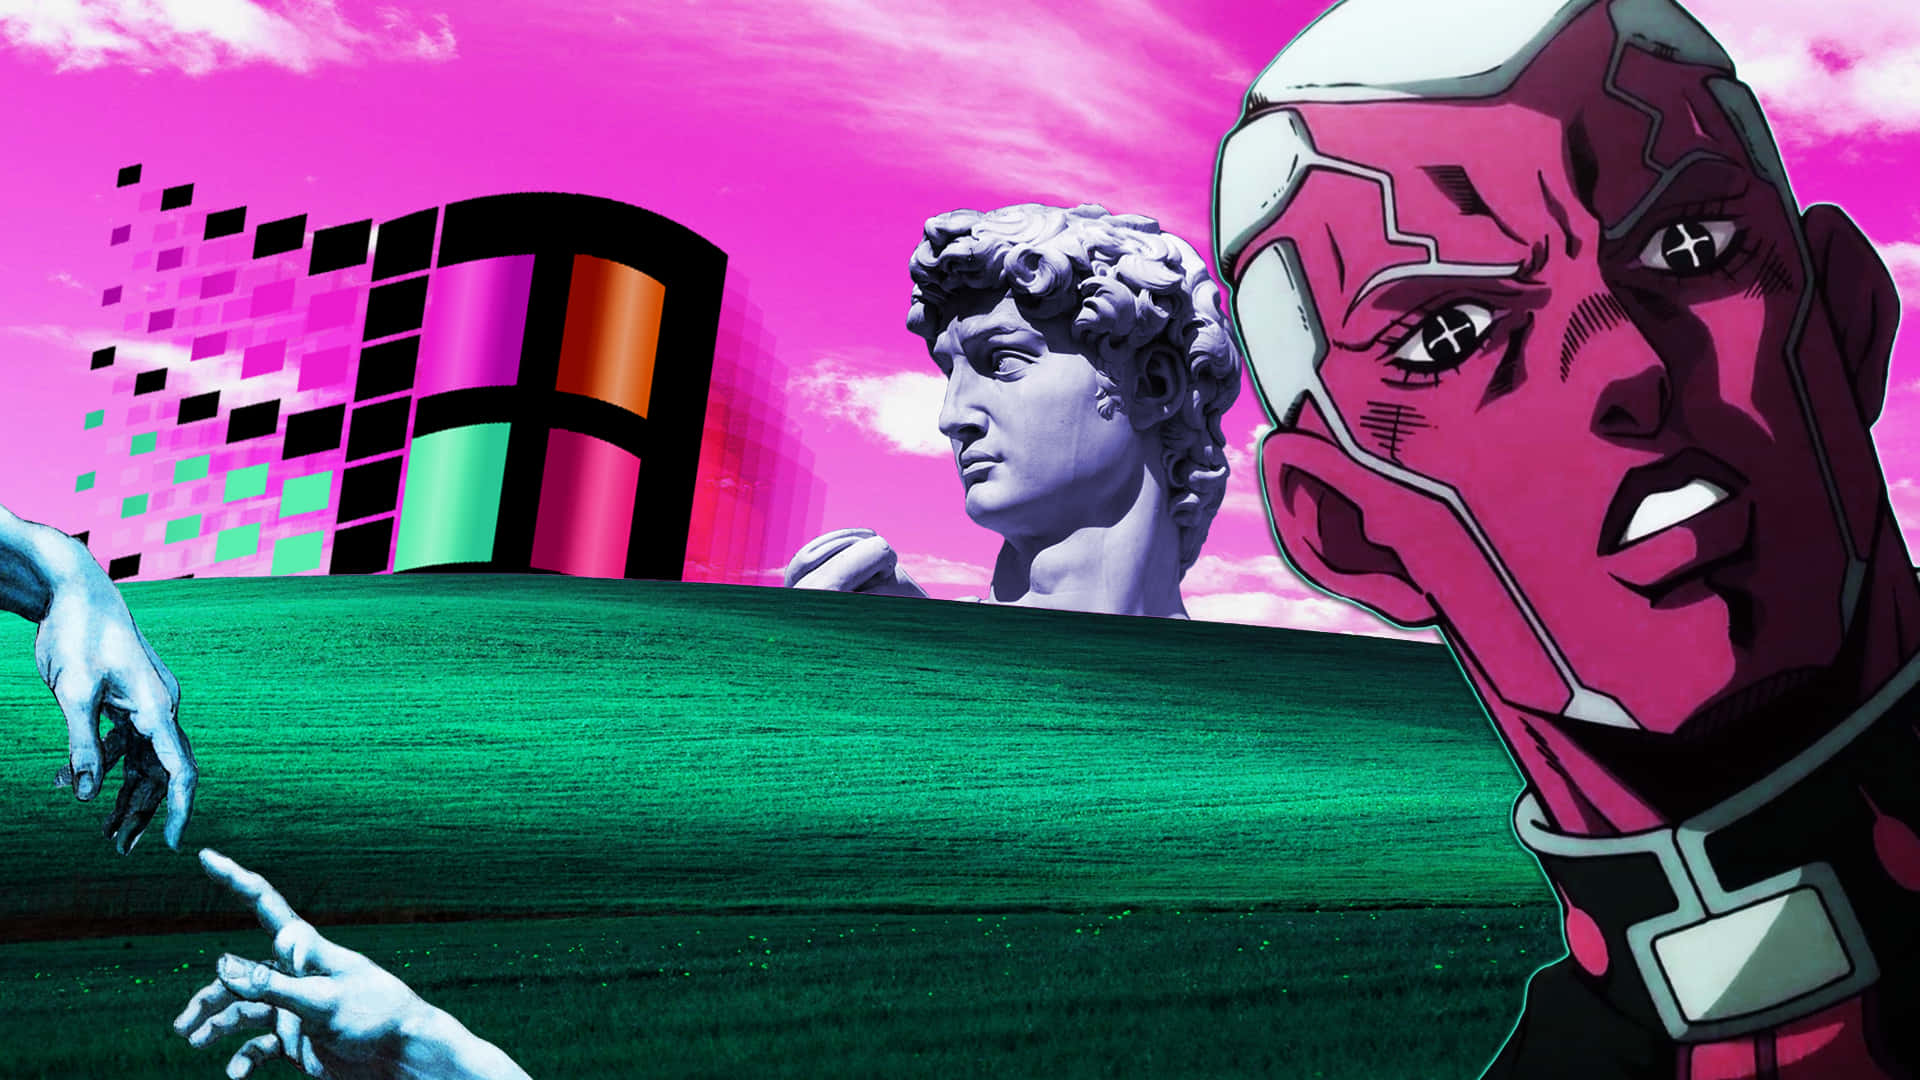 "Enrico Pucci, the Stand User and Brainwashed Enforcer of the Roman Catholic Church" Wallpaper